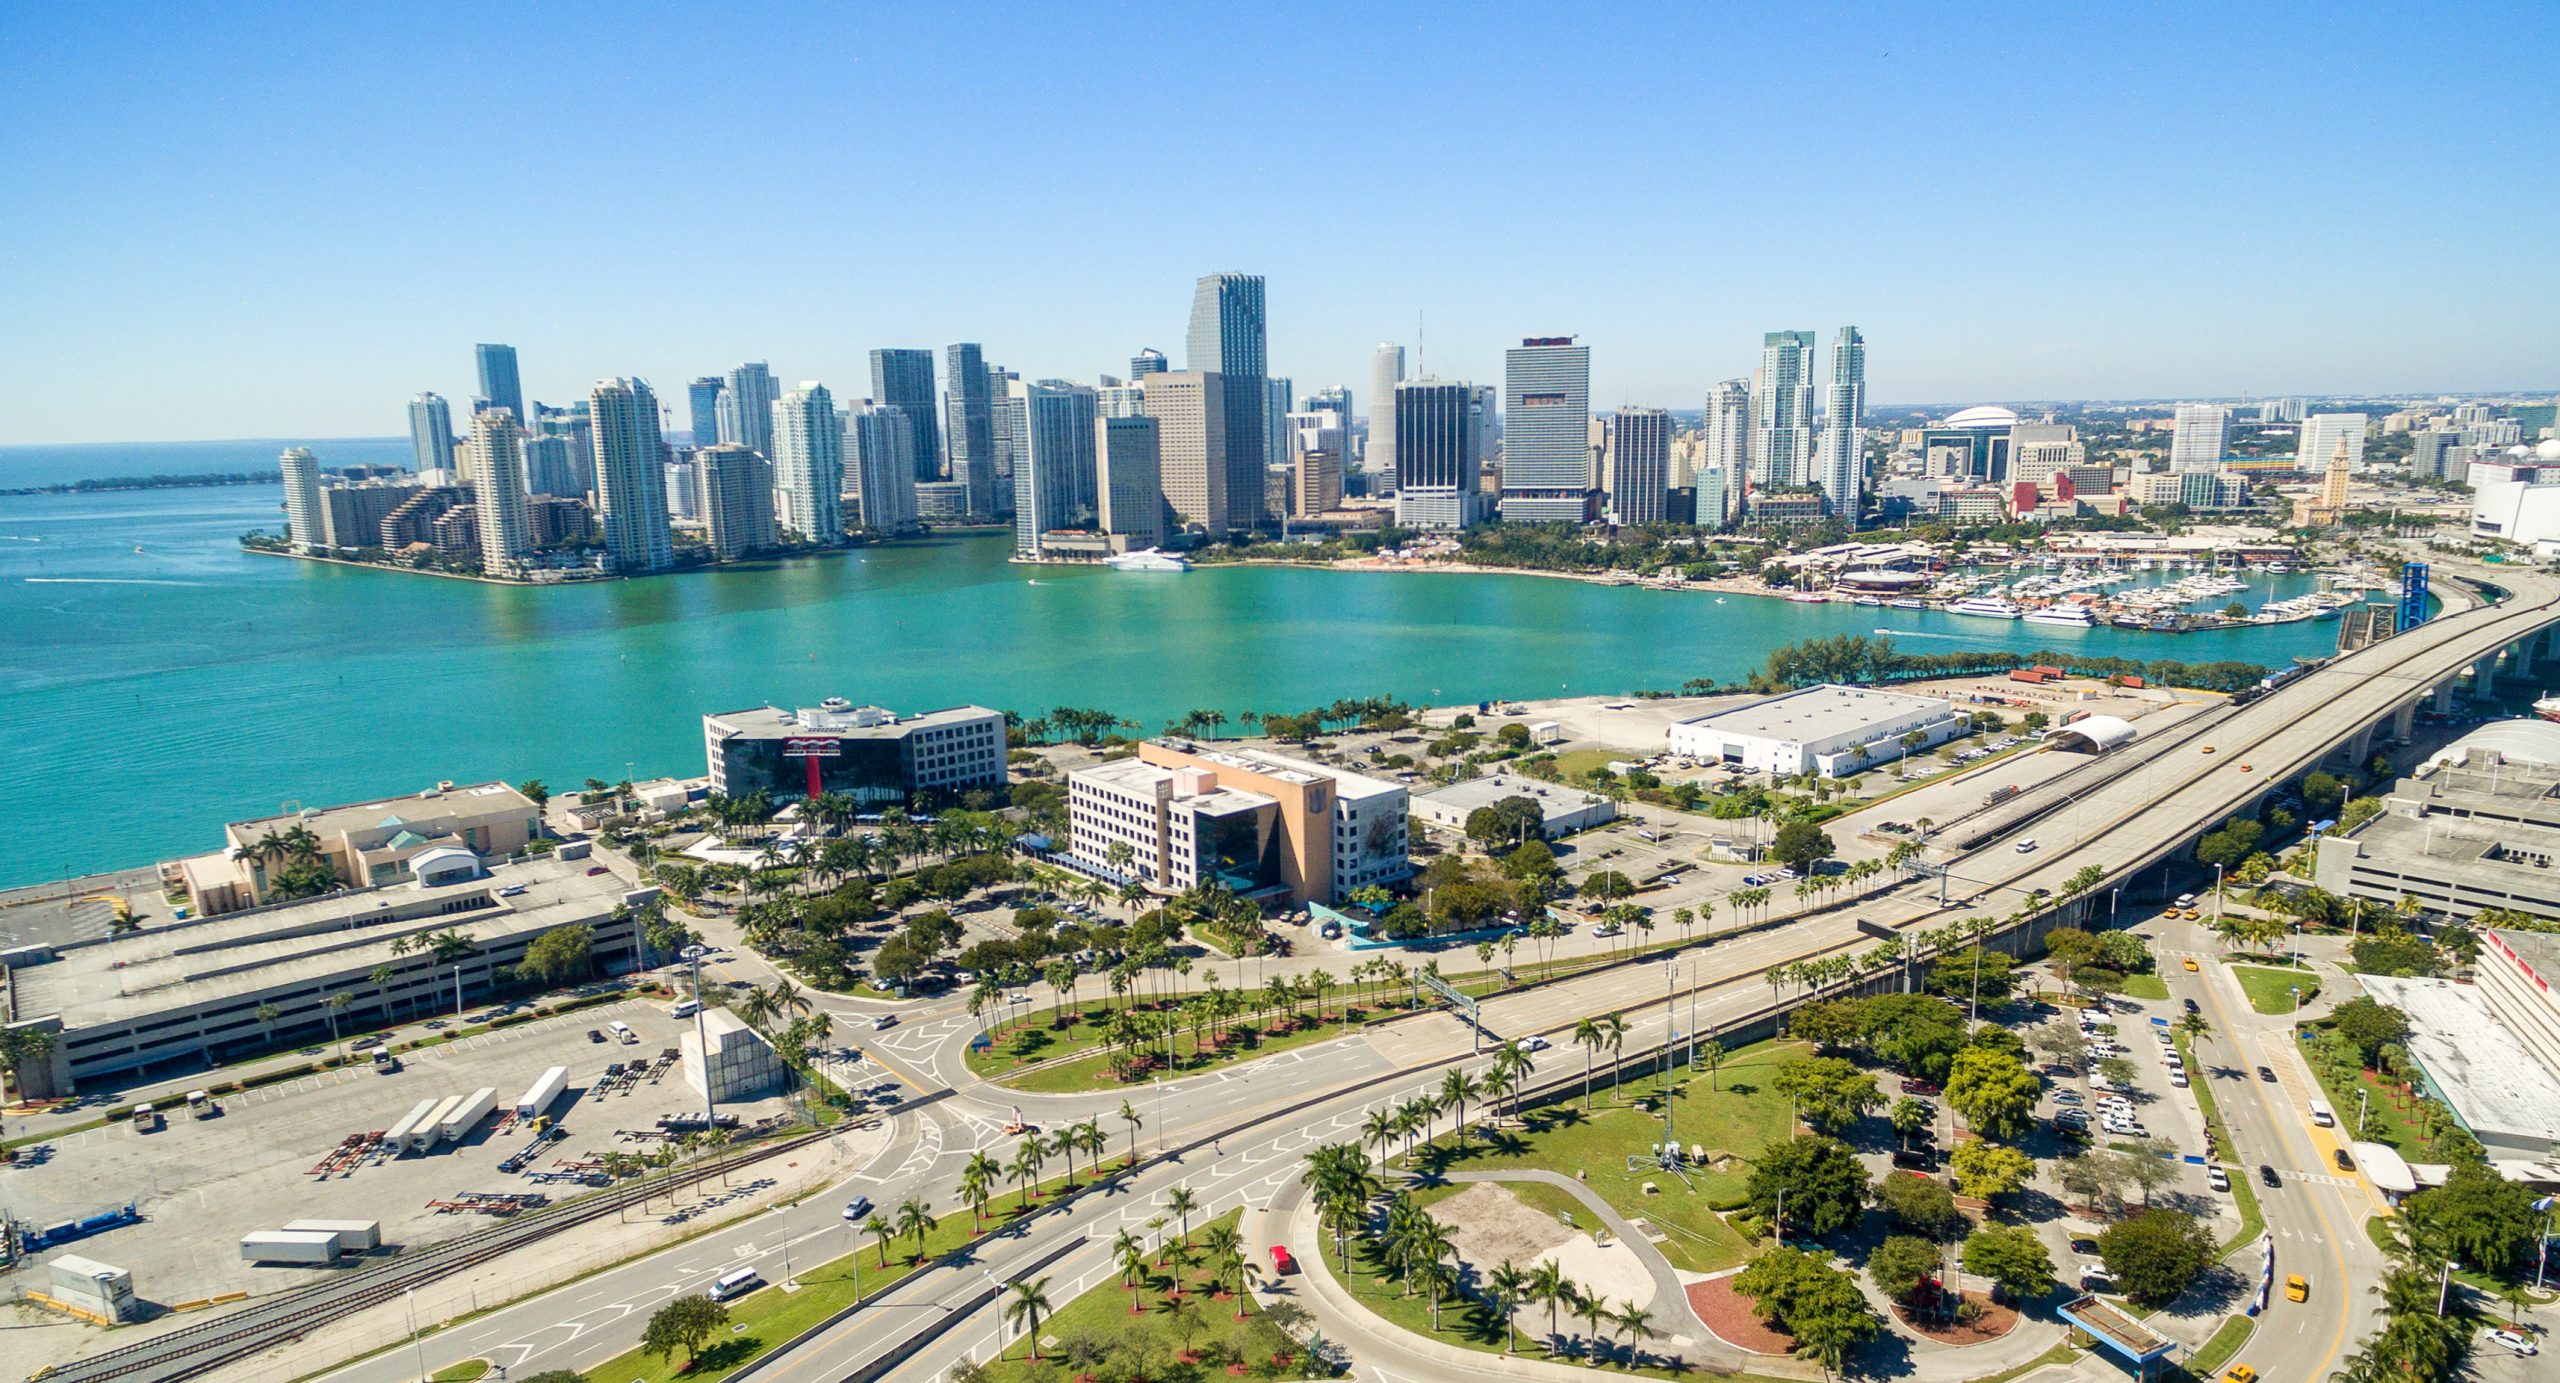 The Best Cruise Shore Excursions in Miami, Florida